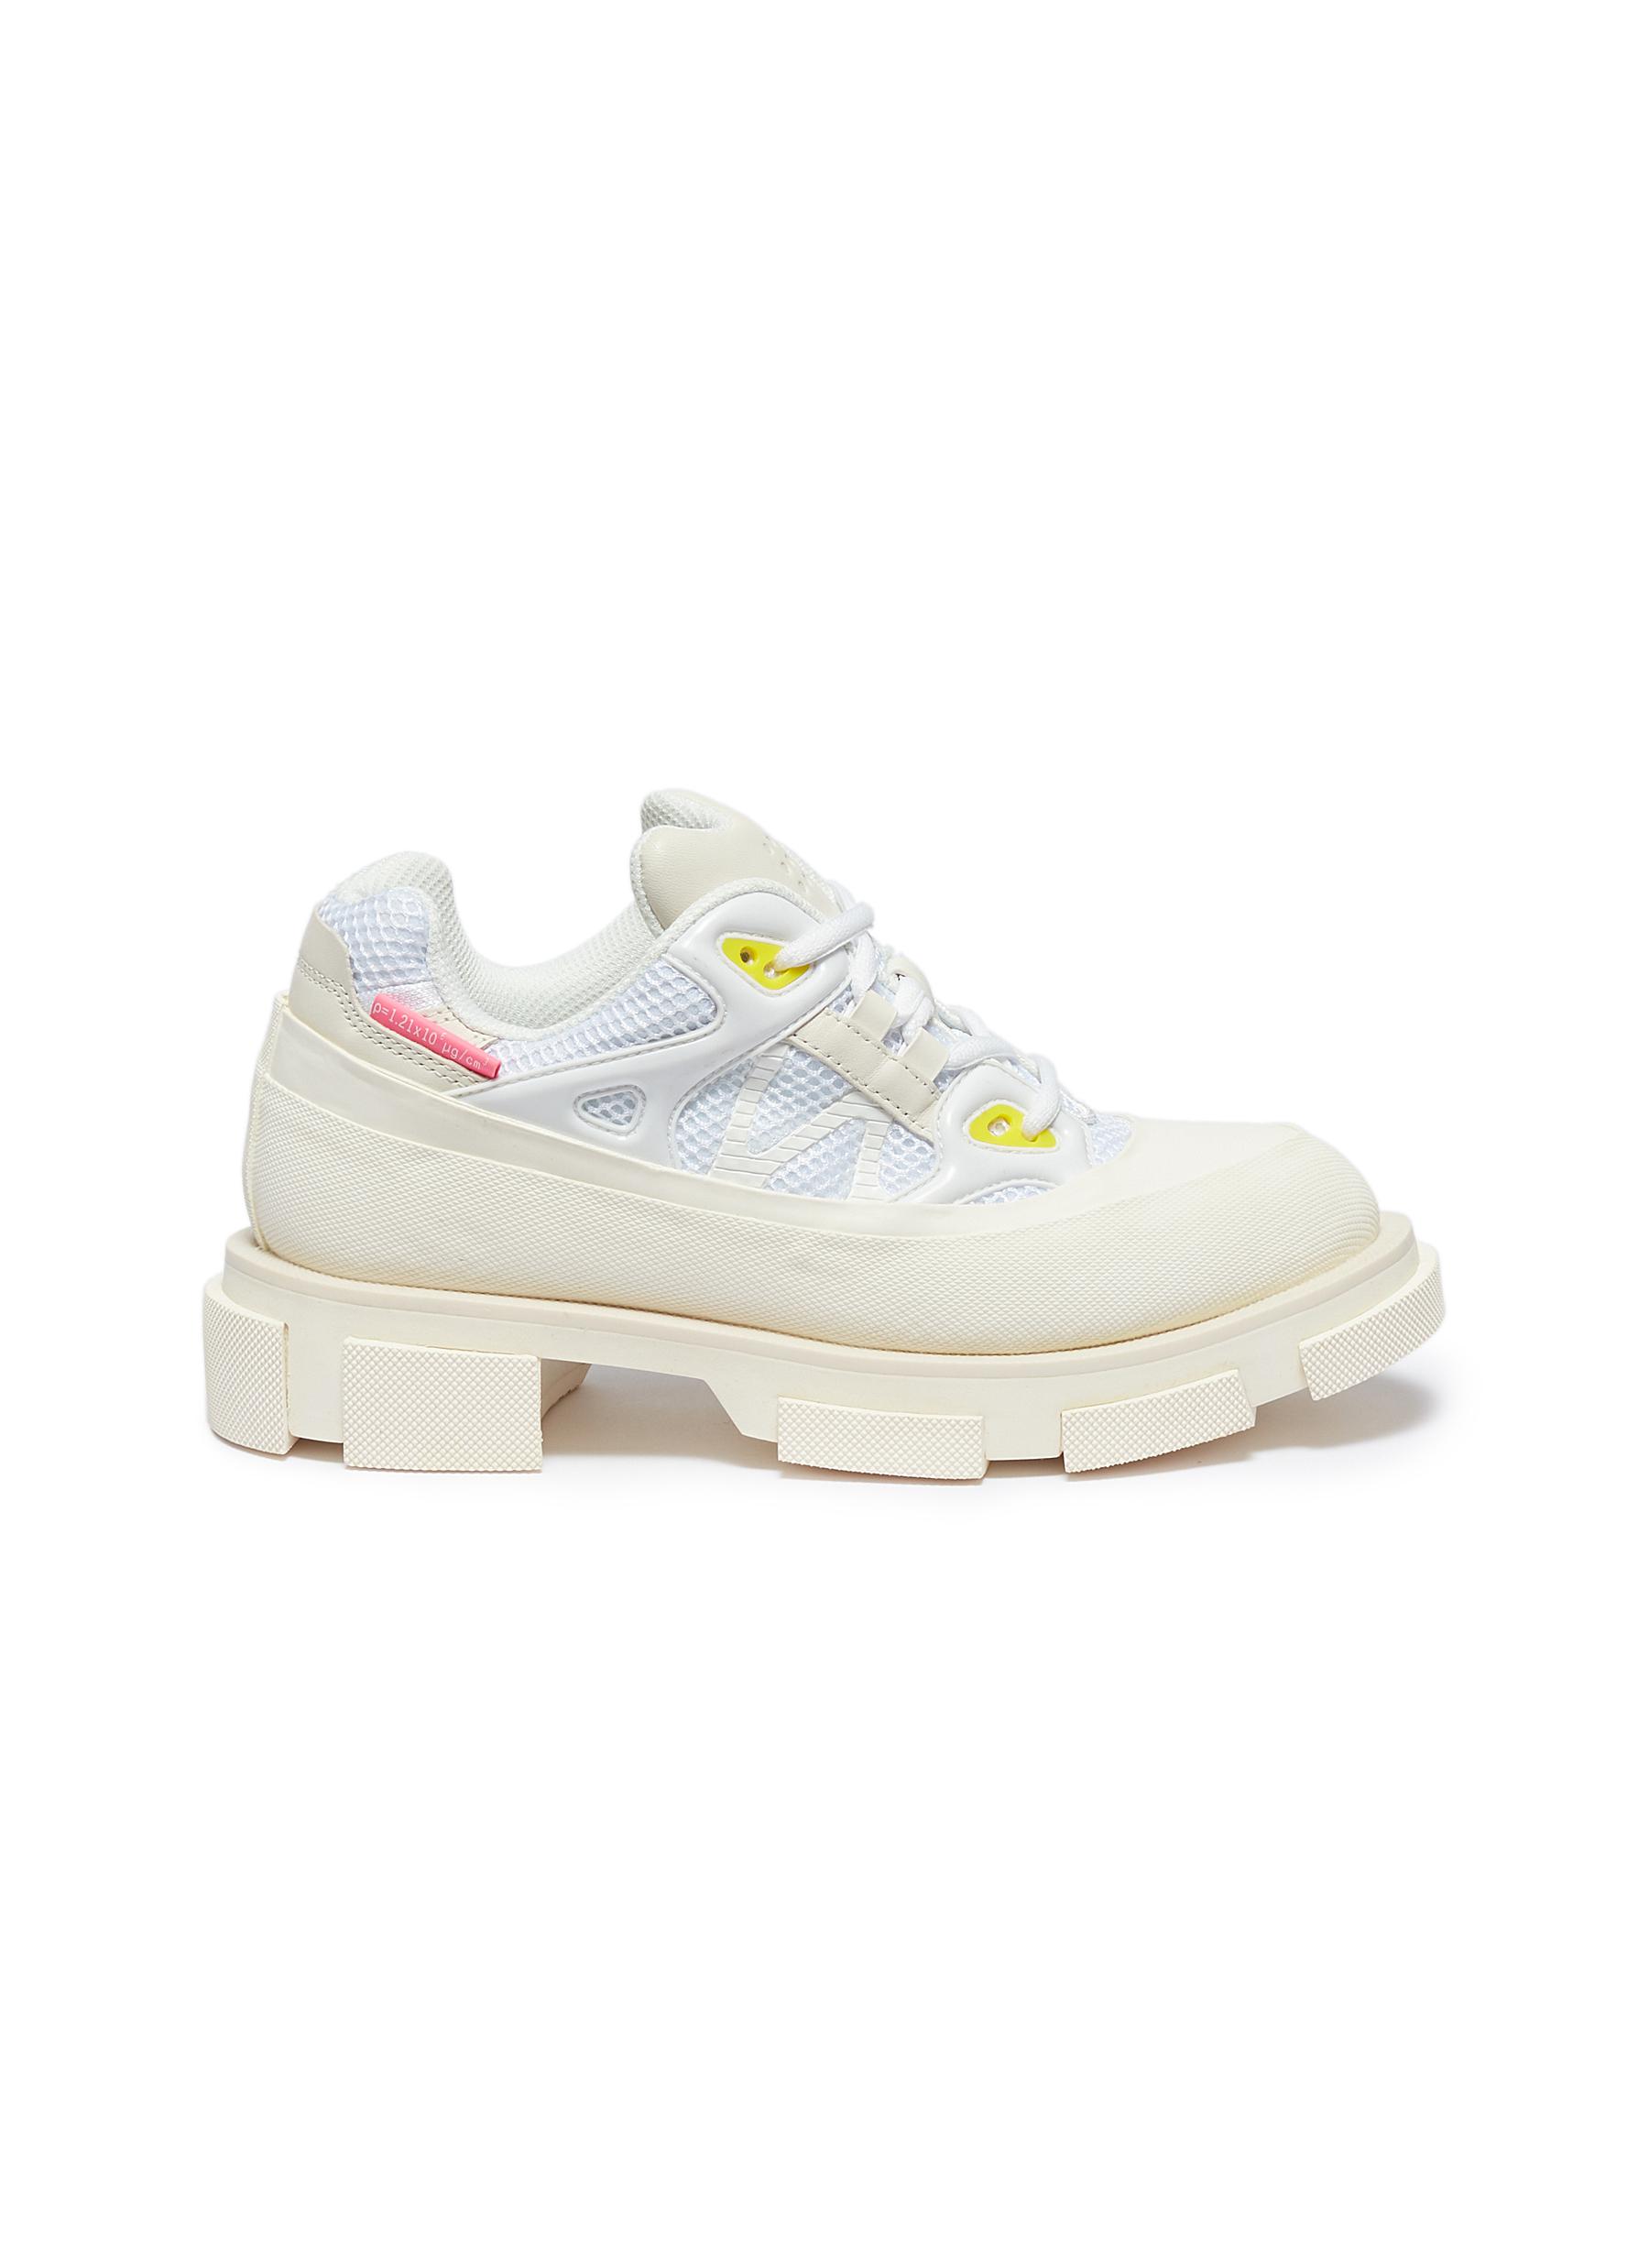 BOTH | 'Gao Runner' web panelled sneakers | OFF-WHITE | Women 